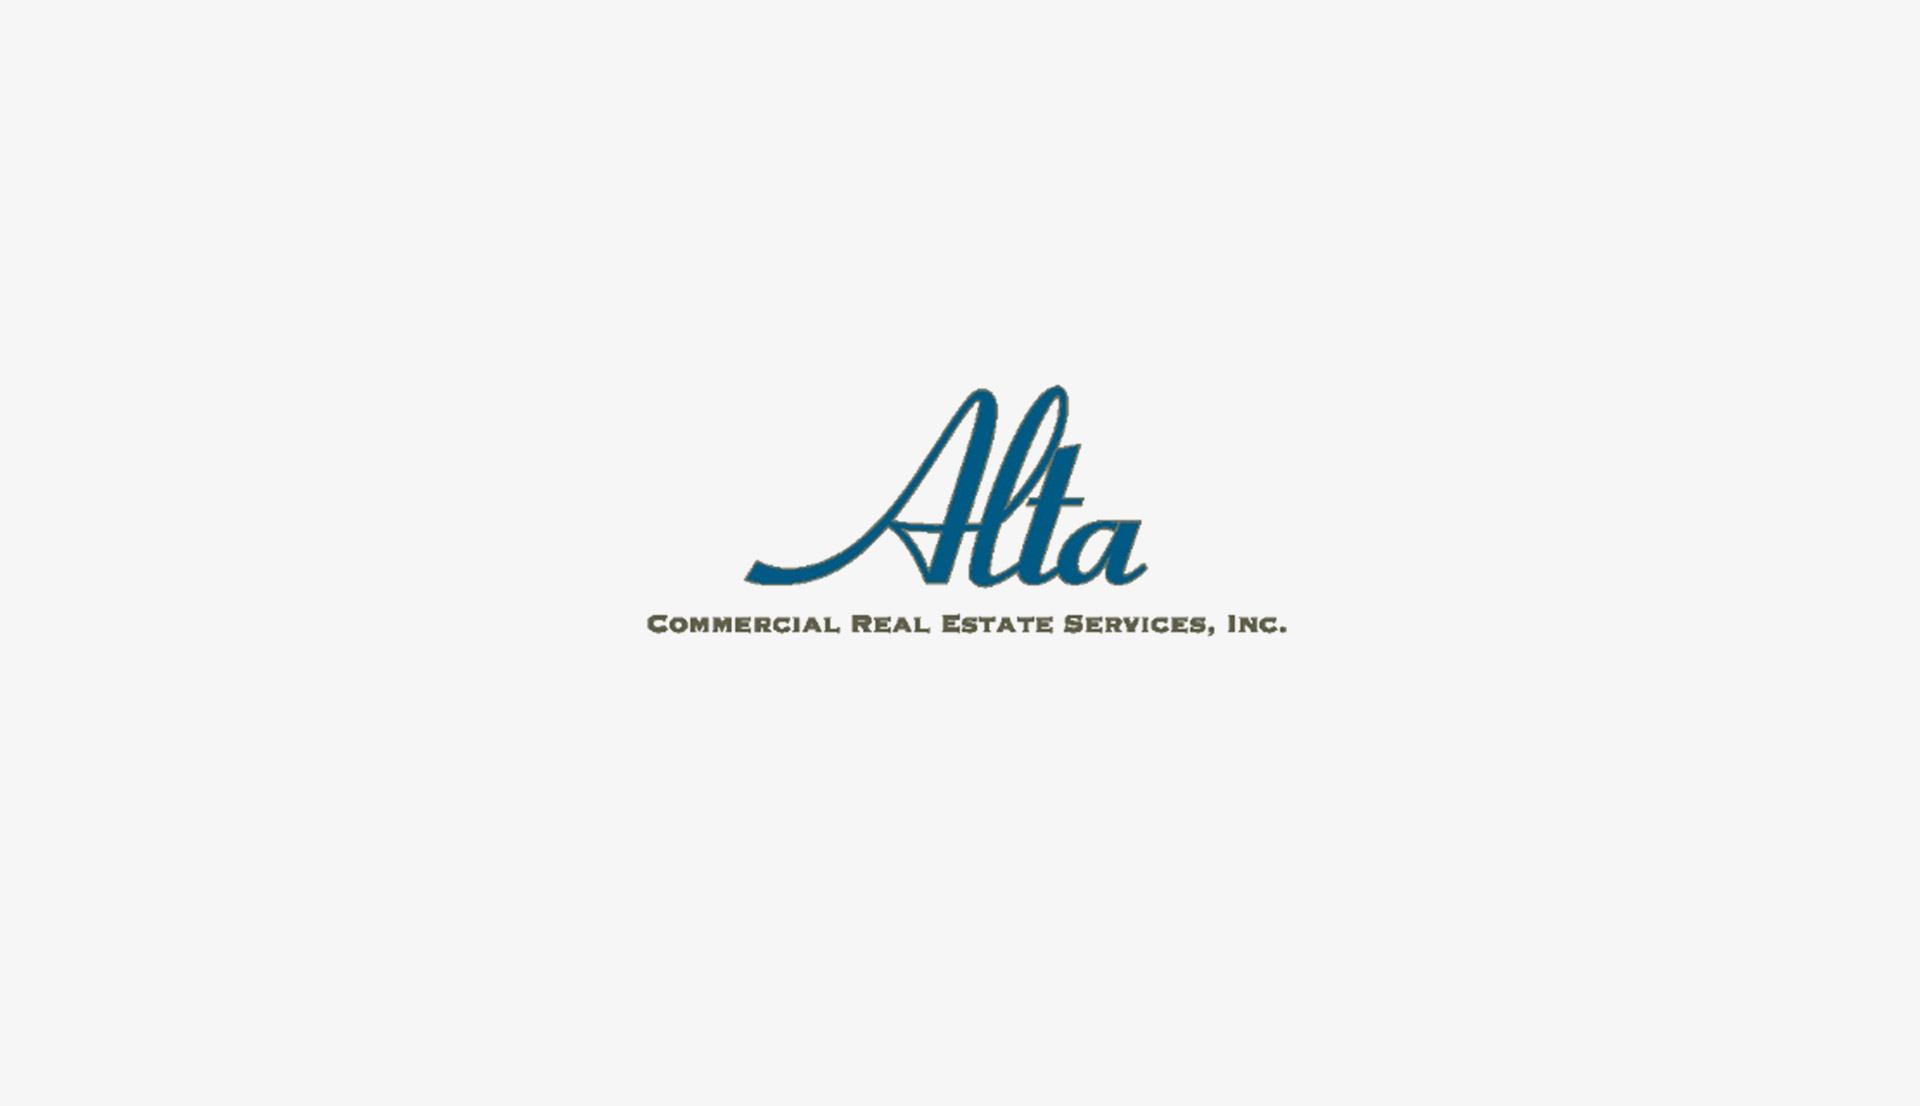 Alta Commercial Real Estate Services, Inc.